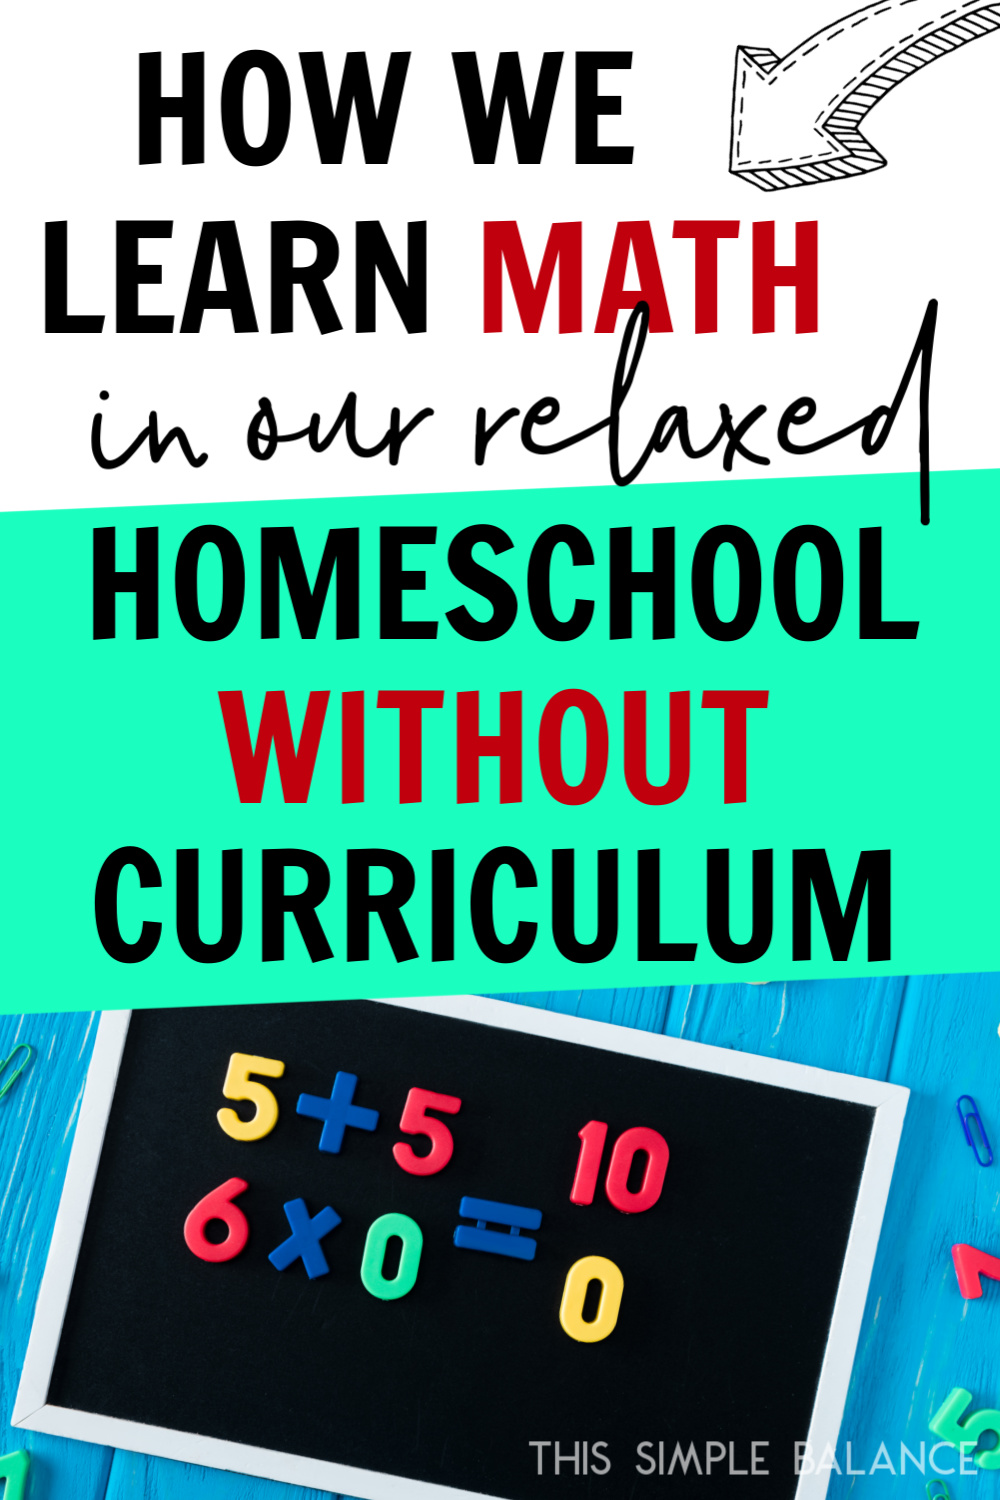 letterboard displaying math problems with colorful number tiles, with text overlay "how we learn math in our relaxed homeschool without curriculum"